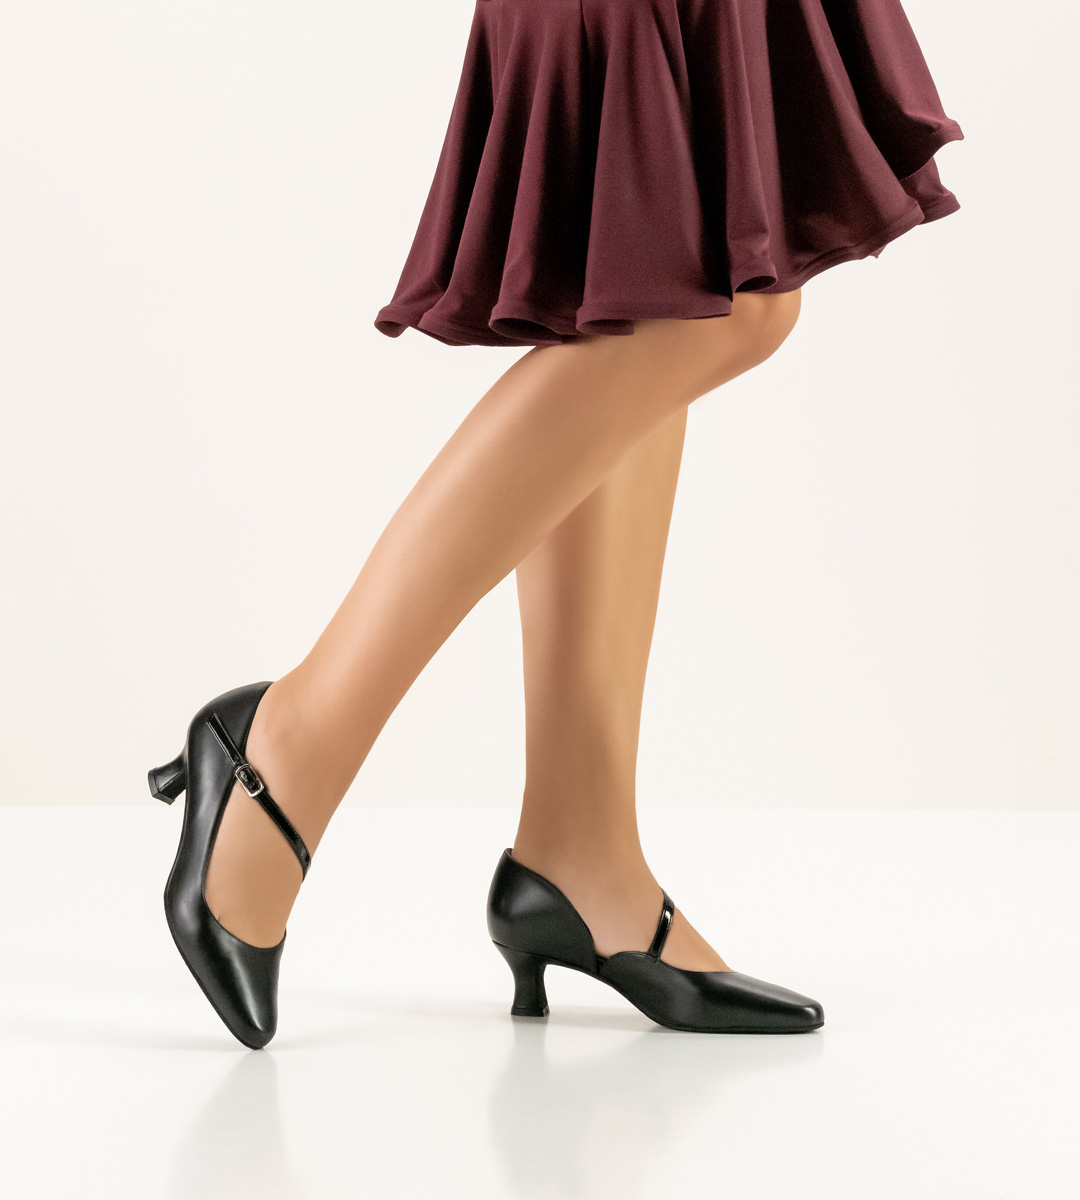 classic Werner Kern ladies dance shoe in combination with red skirt